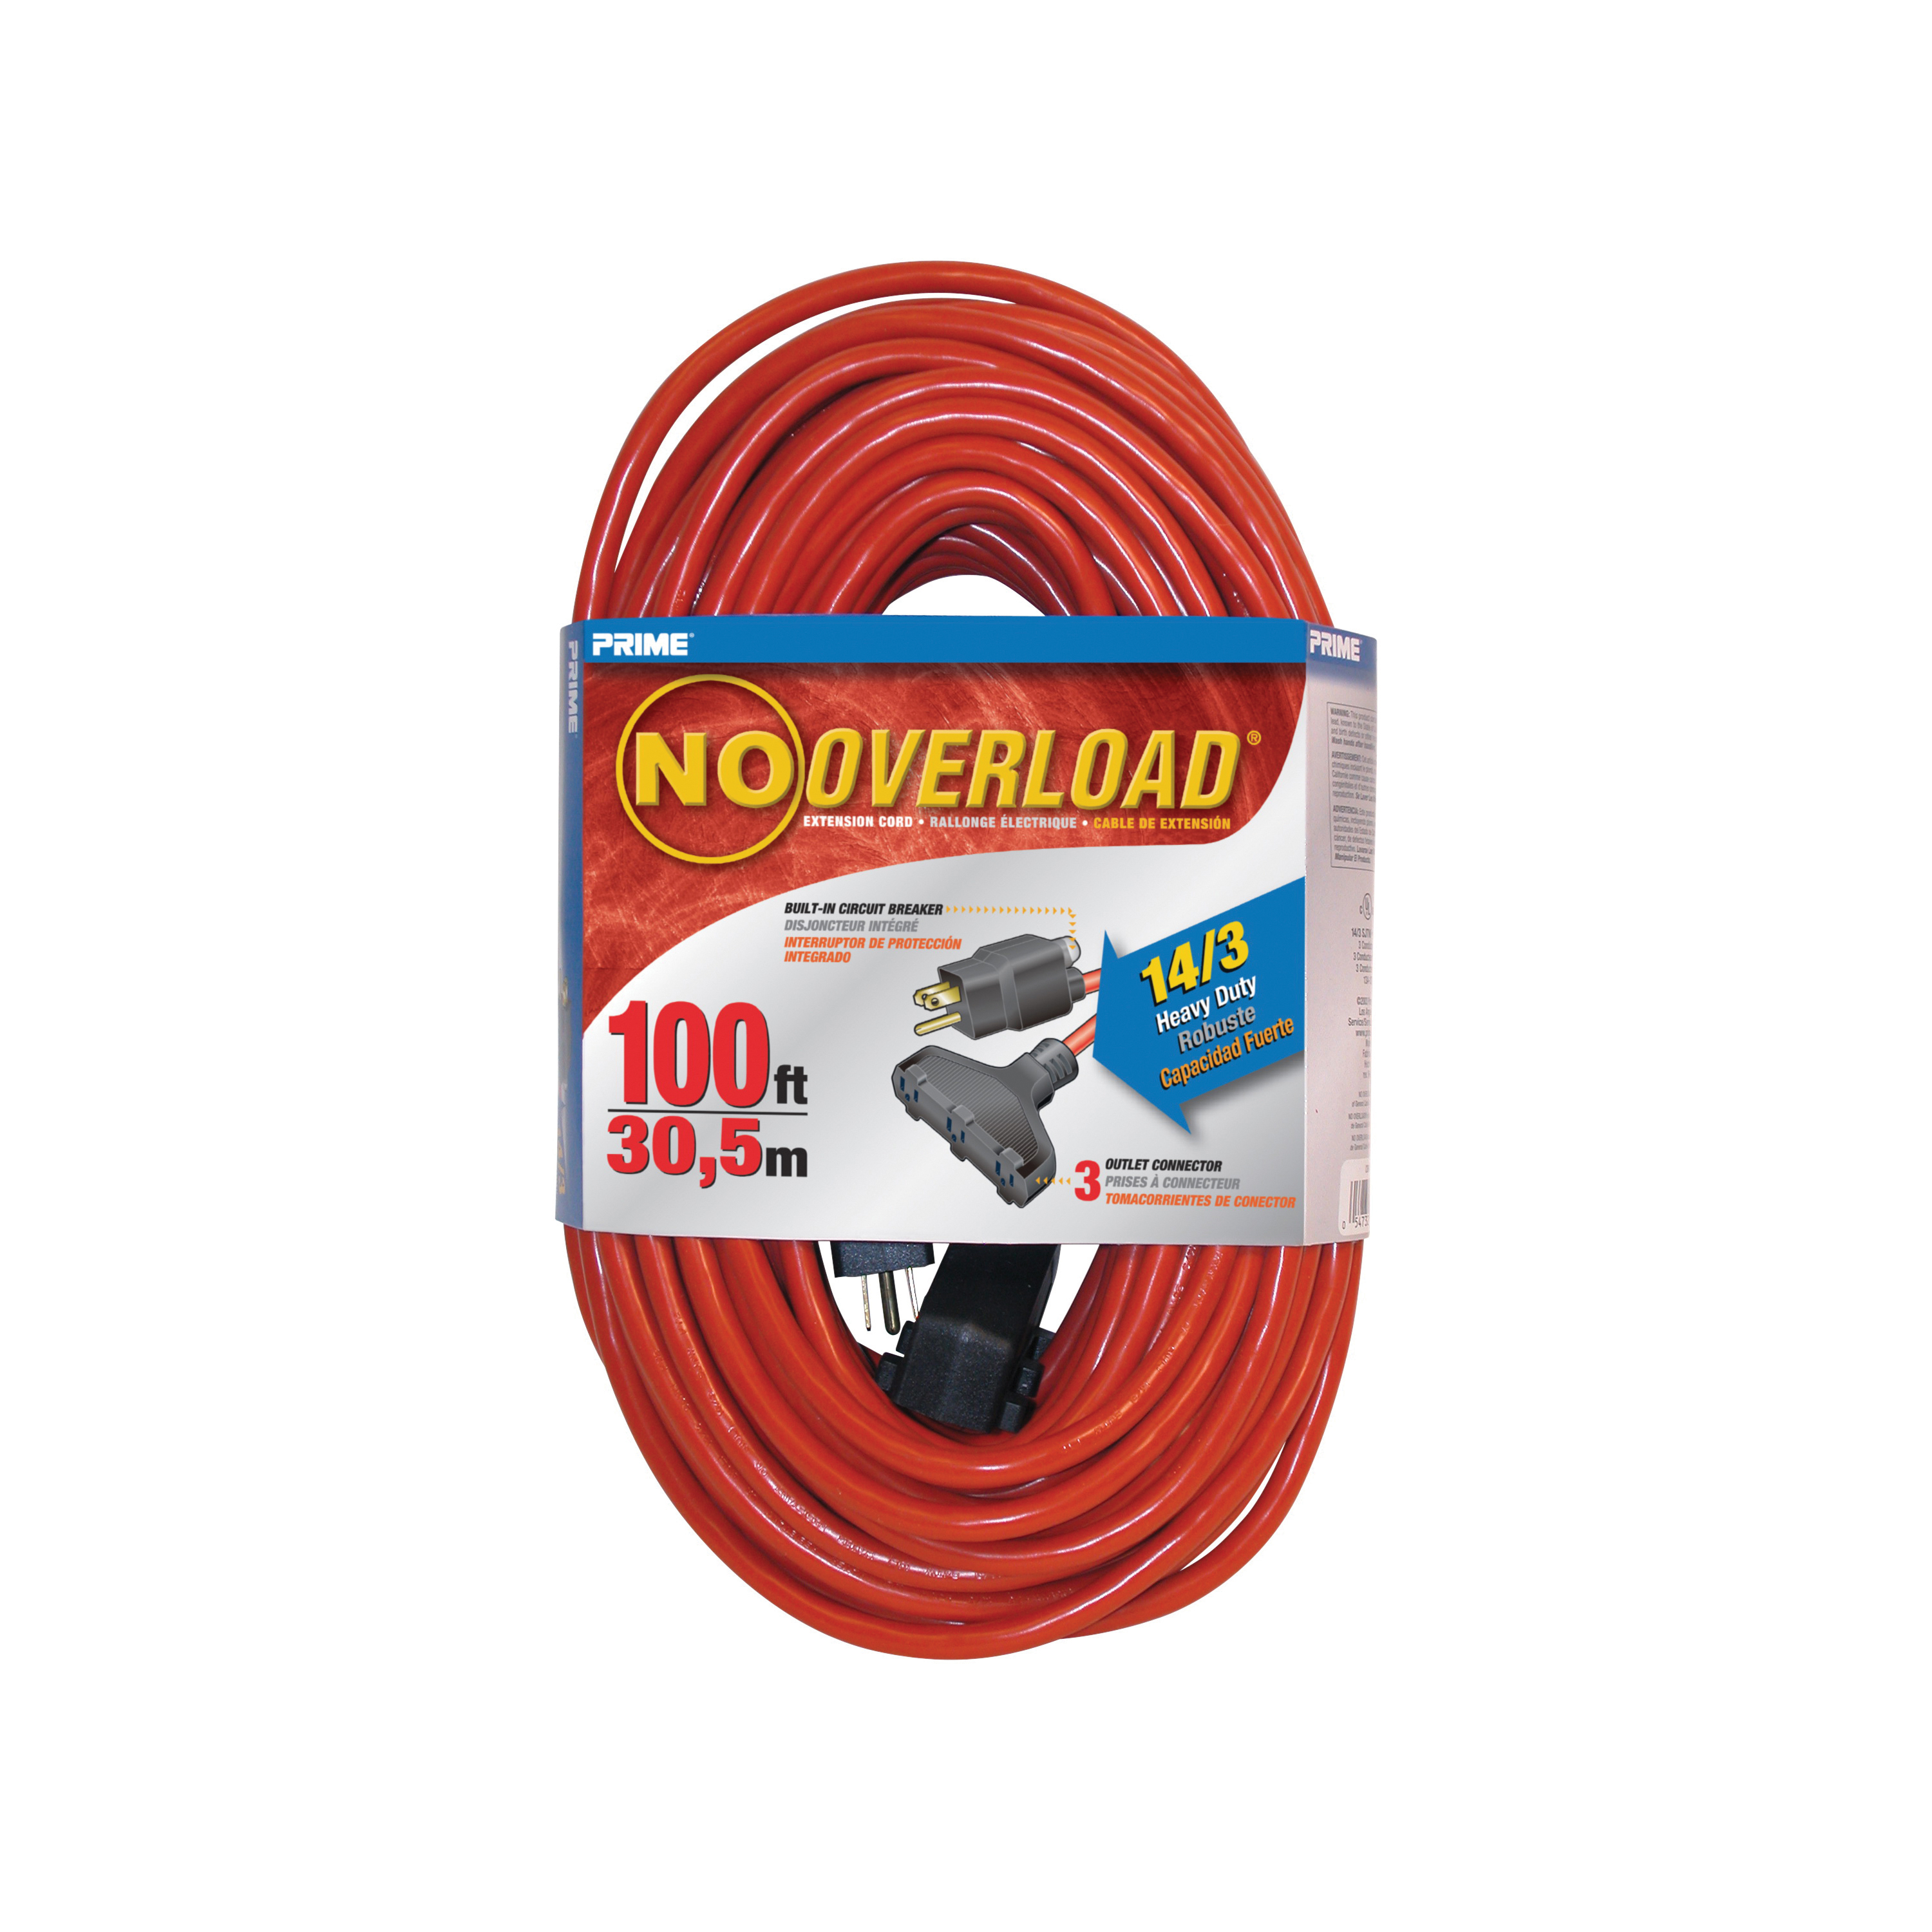 Prime CB614735 Extension Cord, 100 ft L, 13 A, 125 V, Red - 1